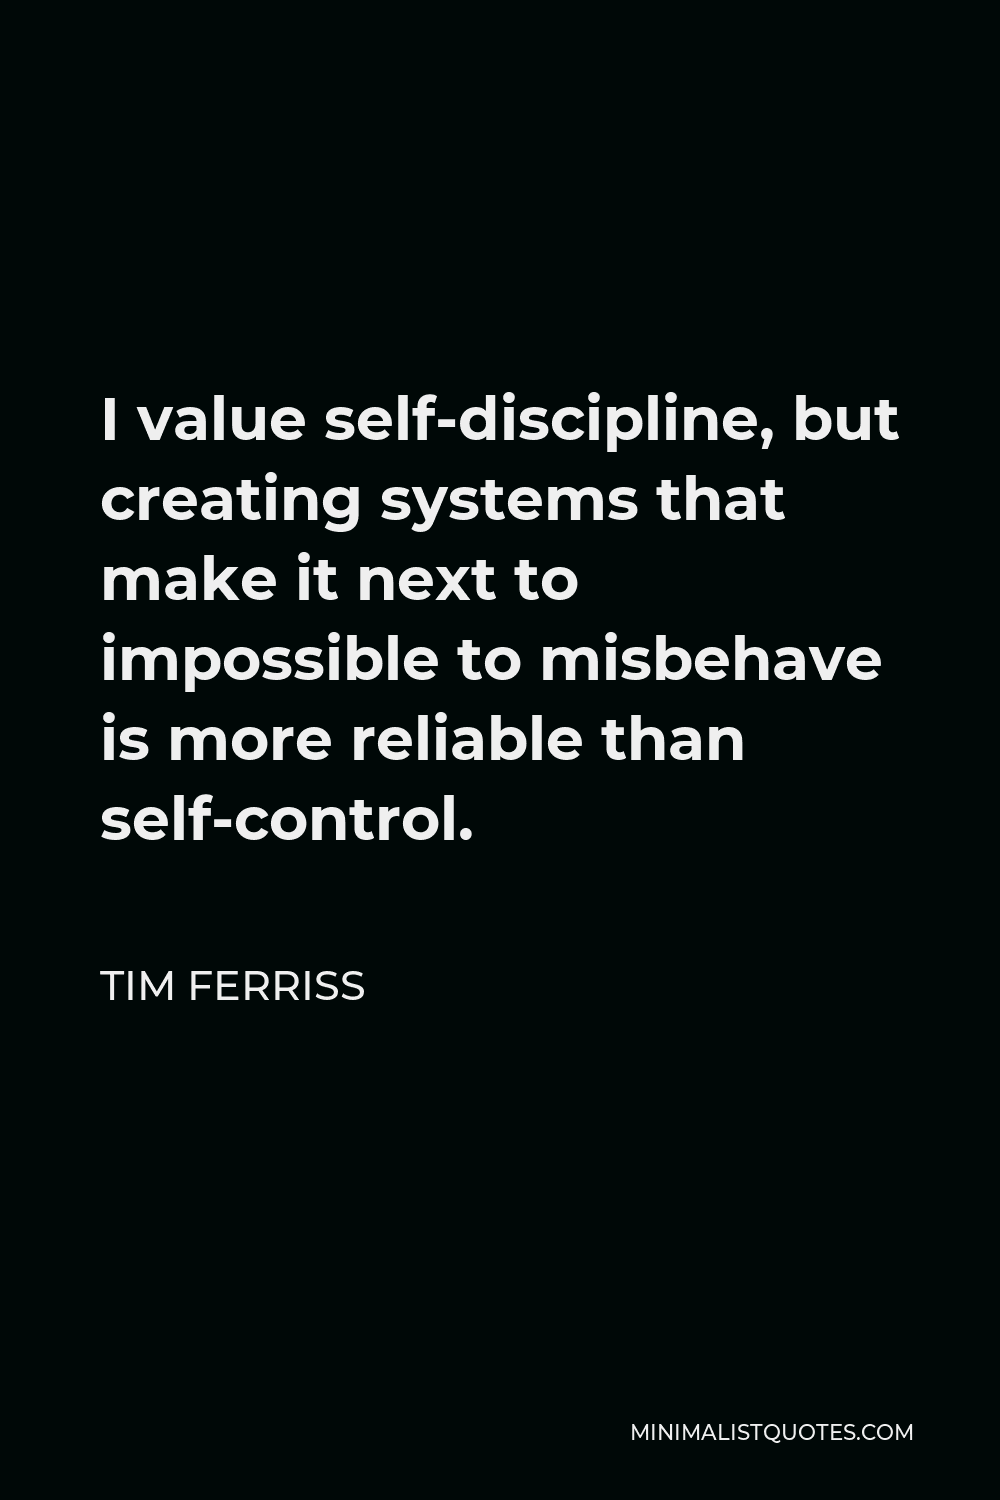 Tim Ferriss Quote - I value self-discipline, but creating systems that make it next to impossible to misbehave is more reliable than self-control.